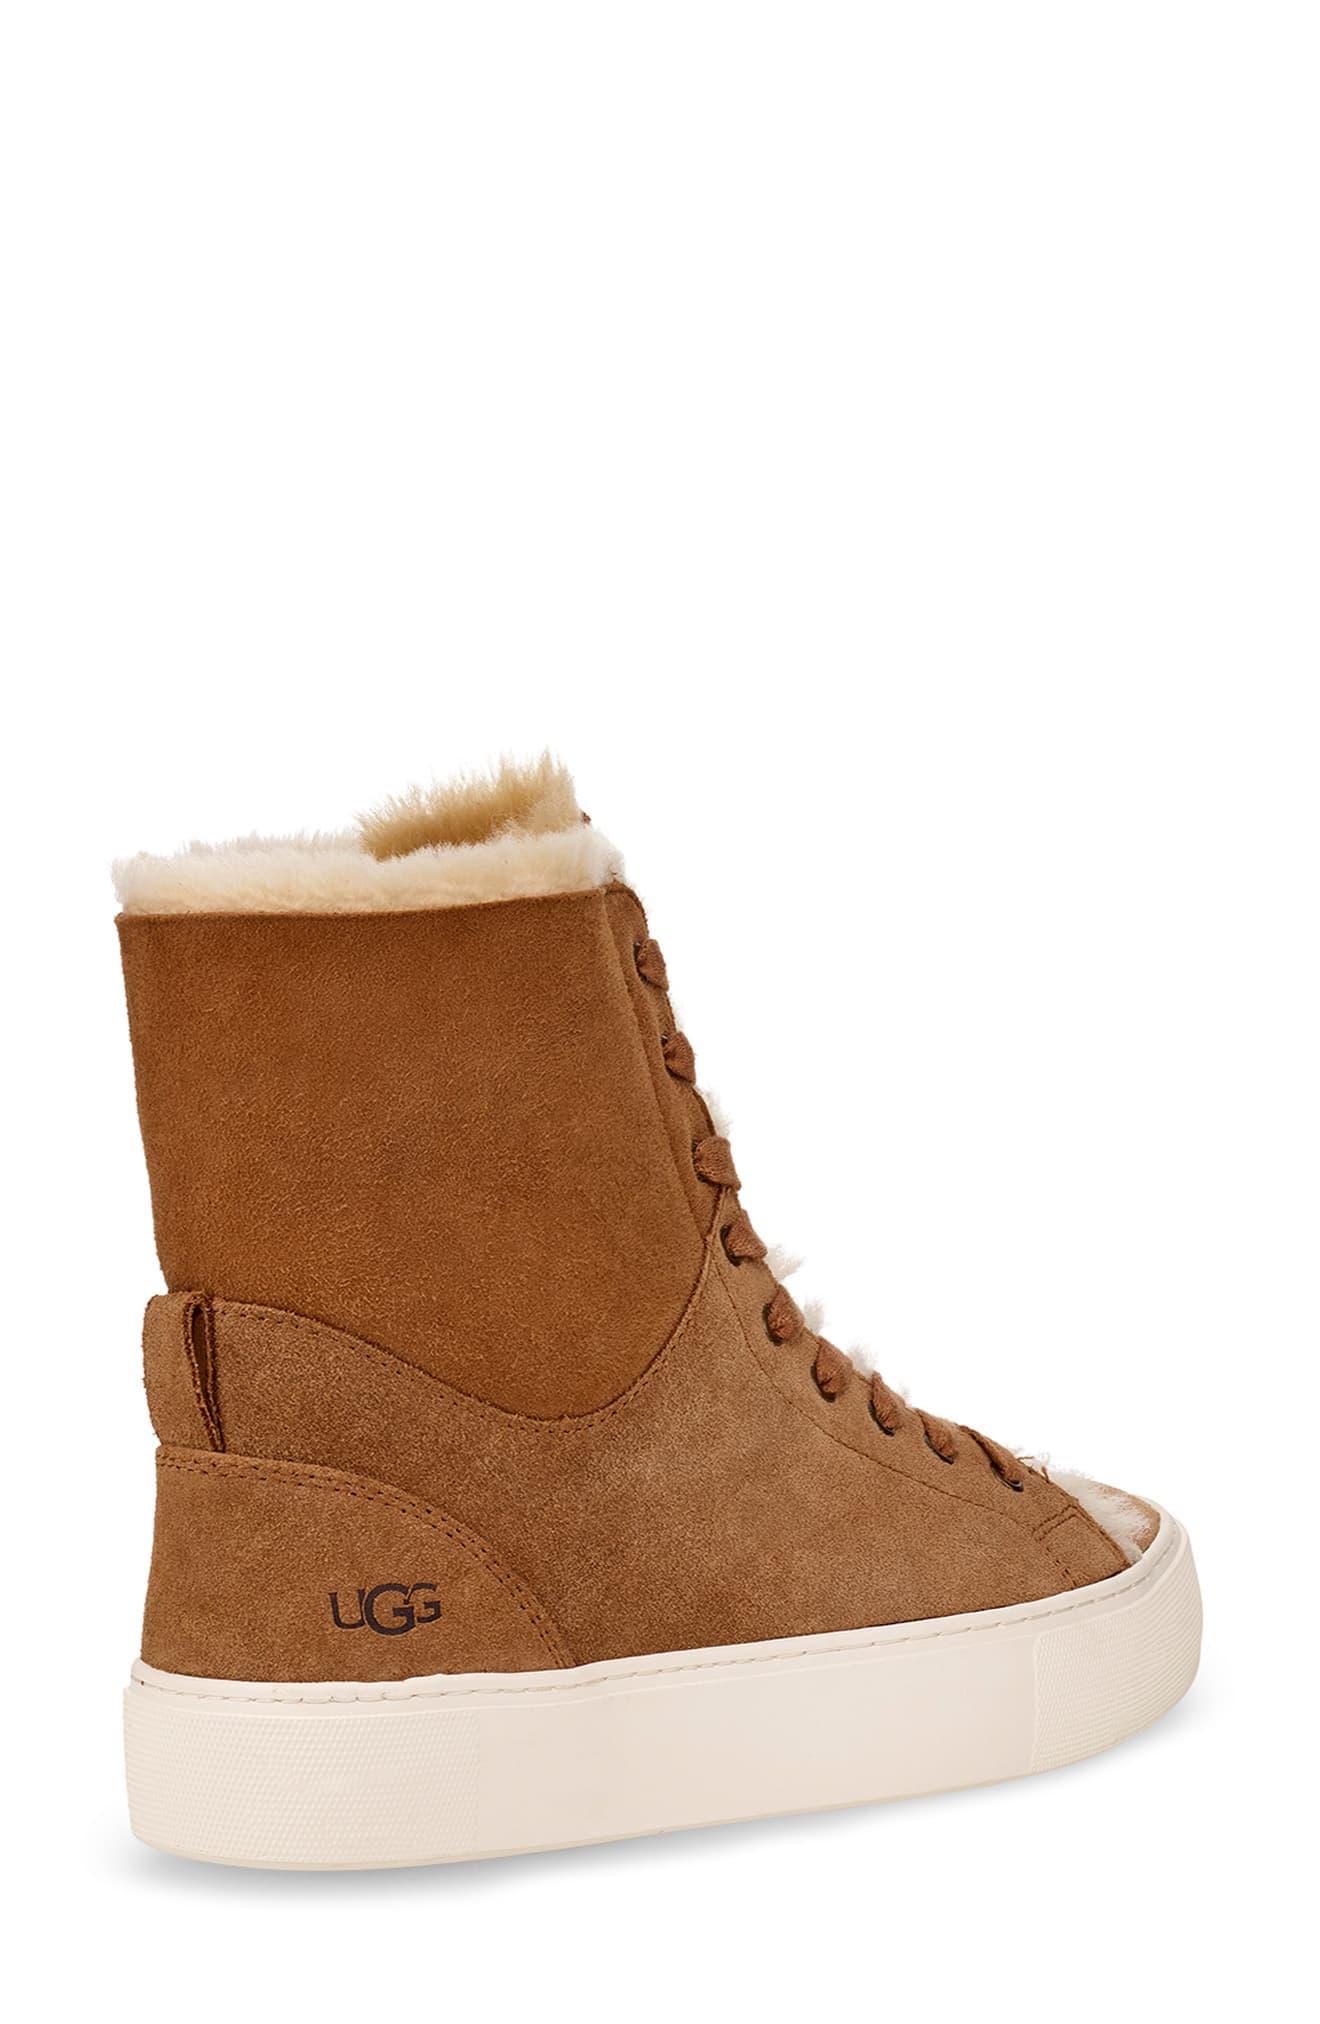 ugg high top shoes